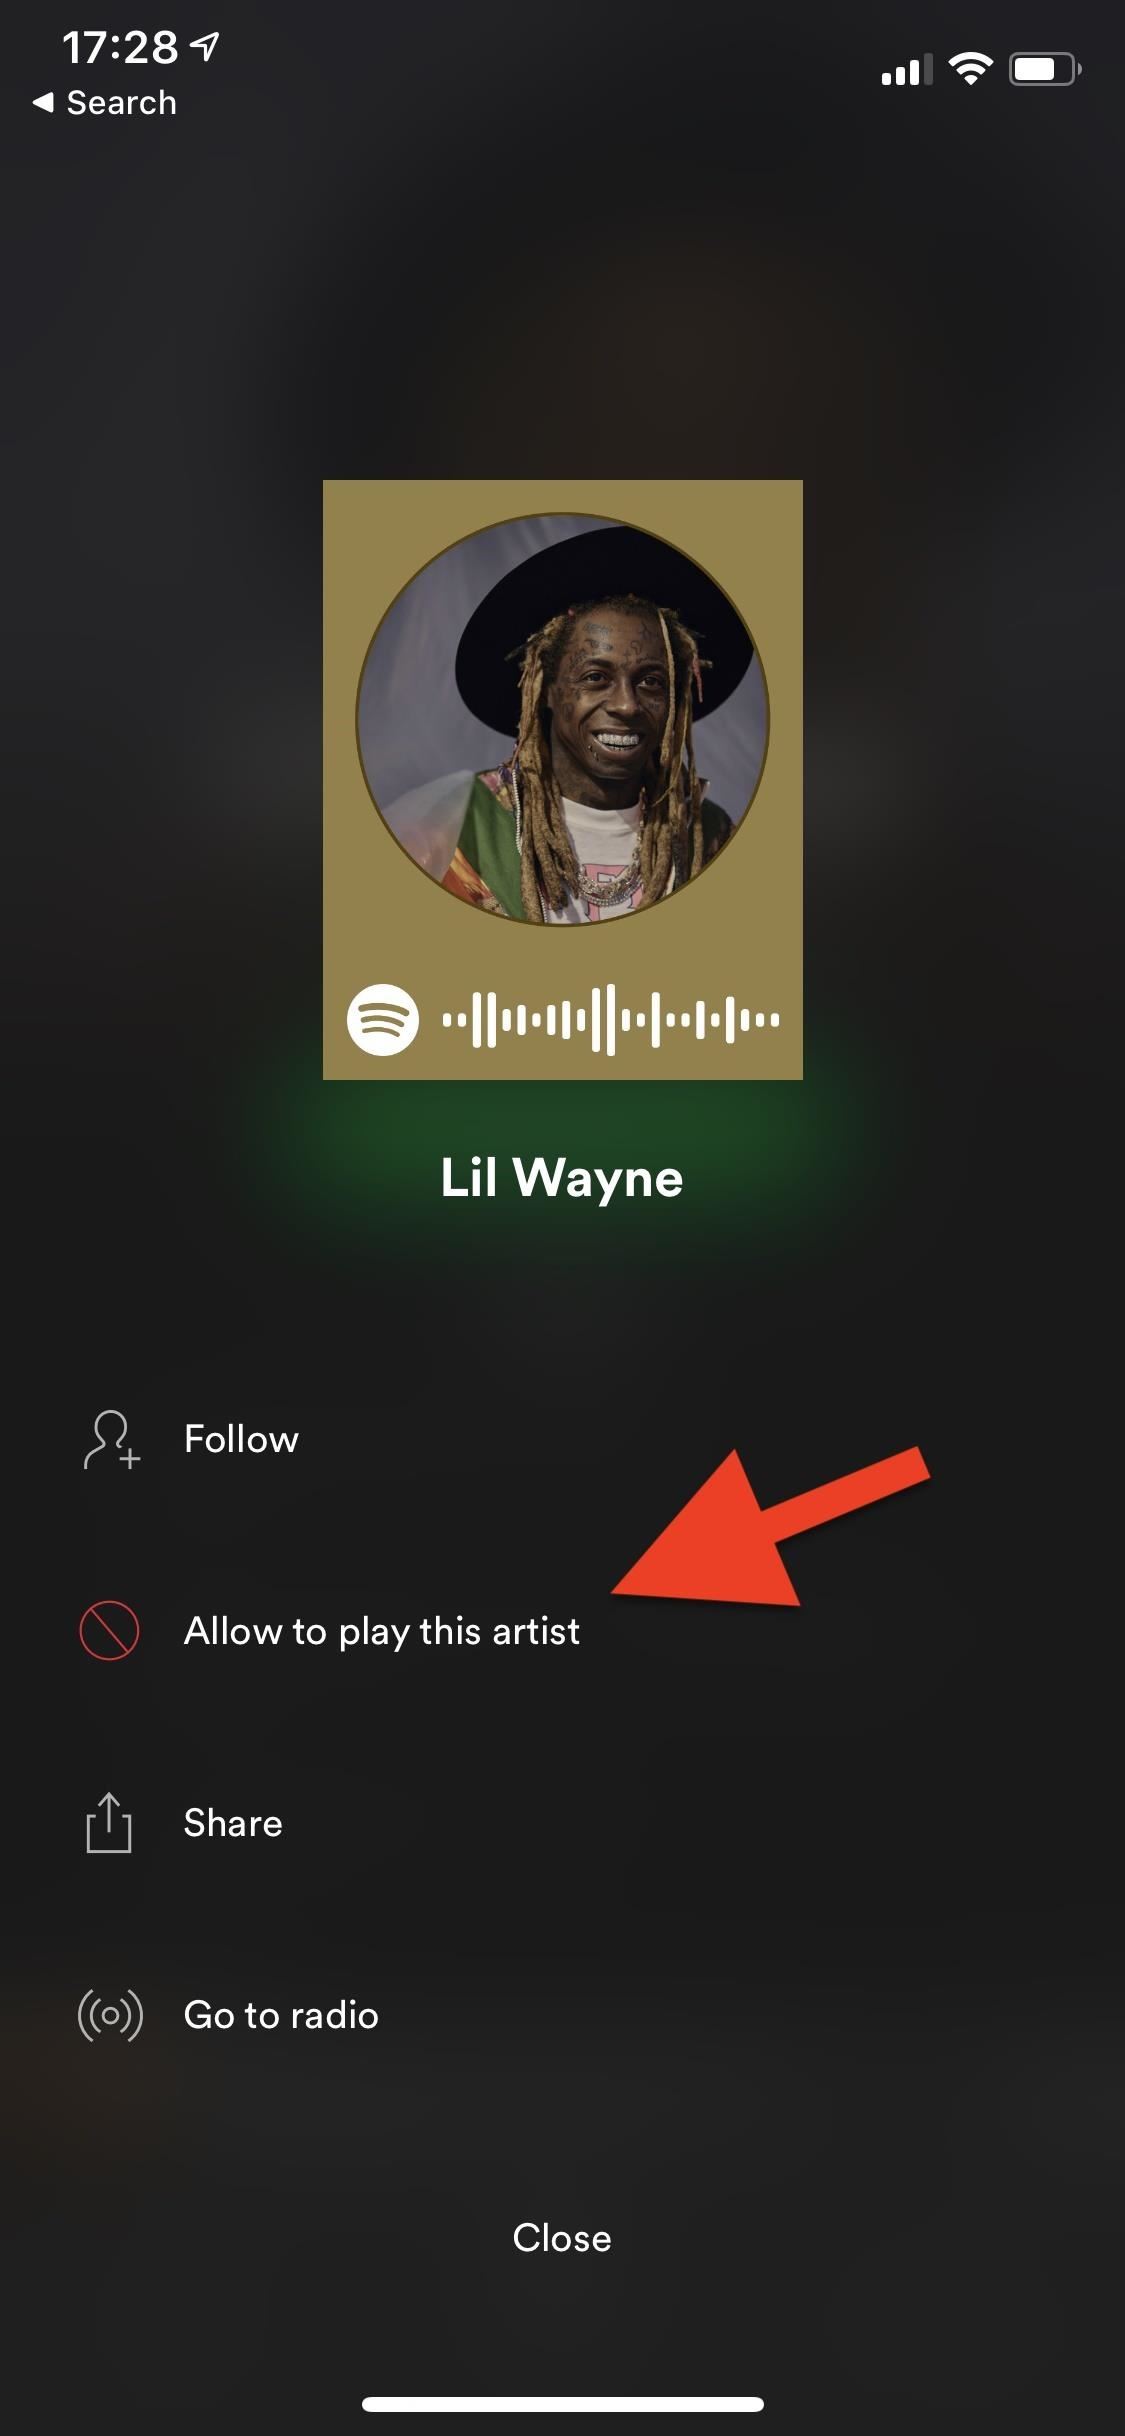 How to Block Artists on Spotify (So You Never Have to Hear Their Music Again)